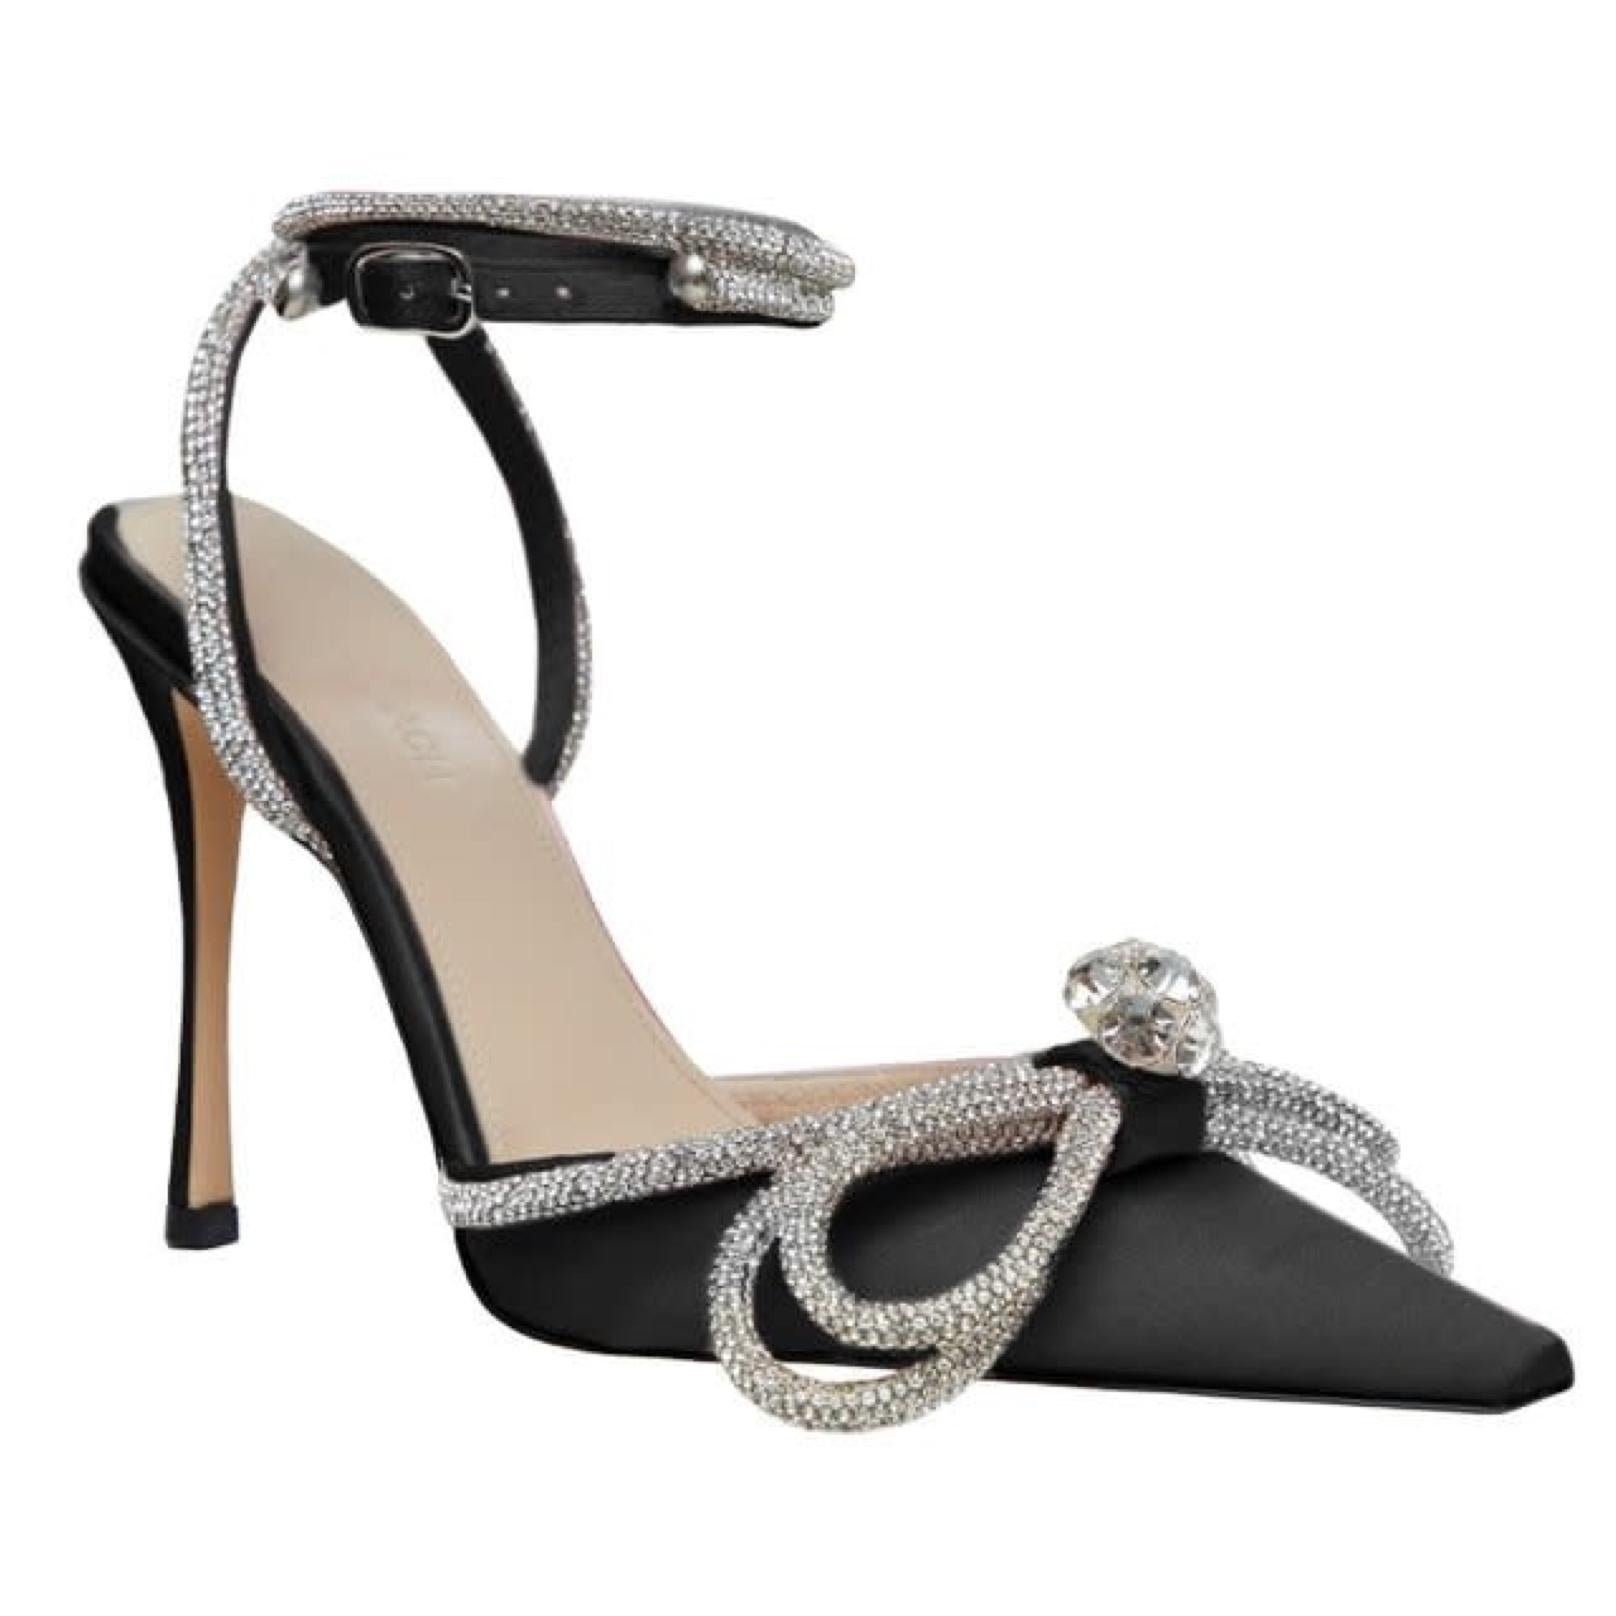 Mach & Mach's Double Bow pumps are a brand signature. This iteration is made from satin and embellished with a crystal-encrusted silver rope that wraps around the ankles and pointed vamp. The pumps future an ankle strap with buckle fastening and a